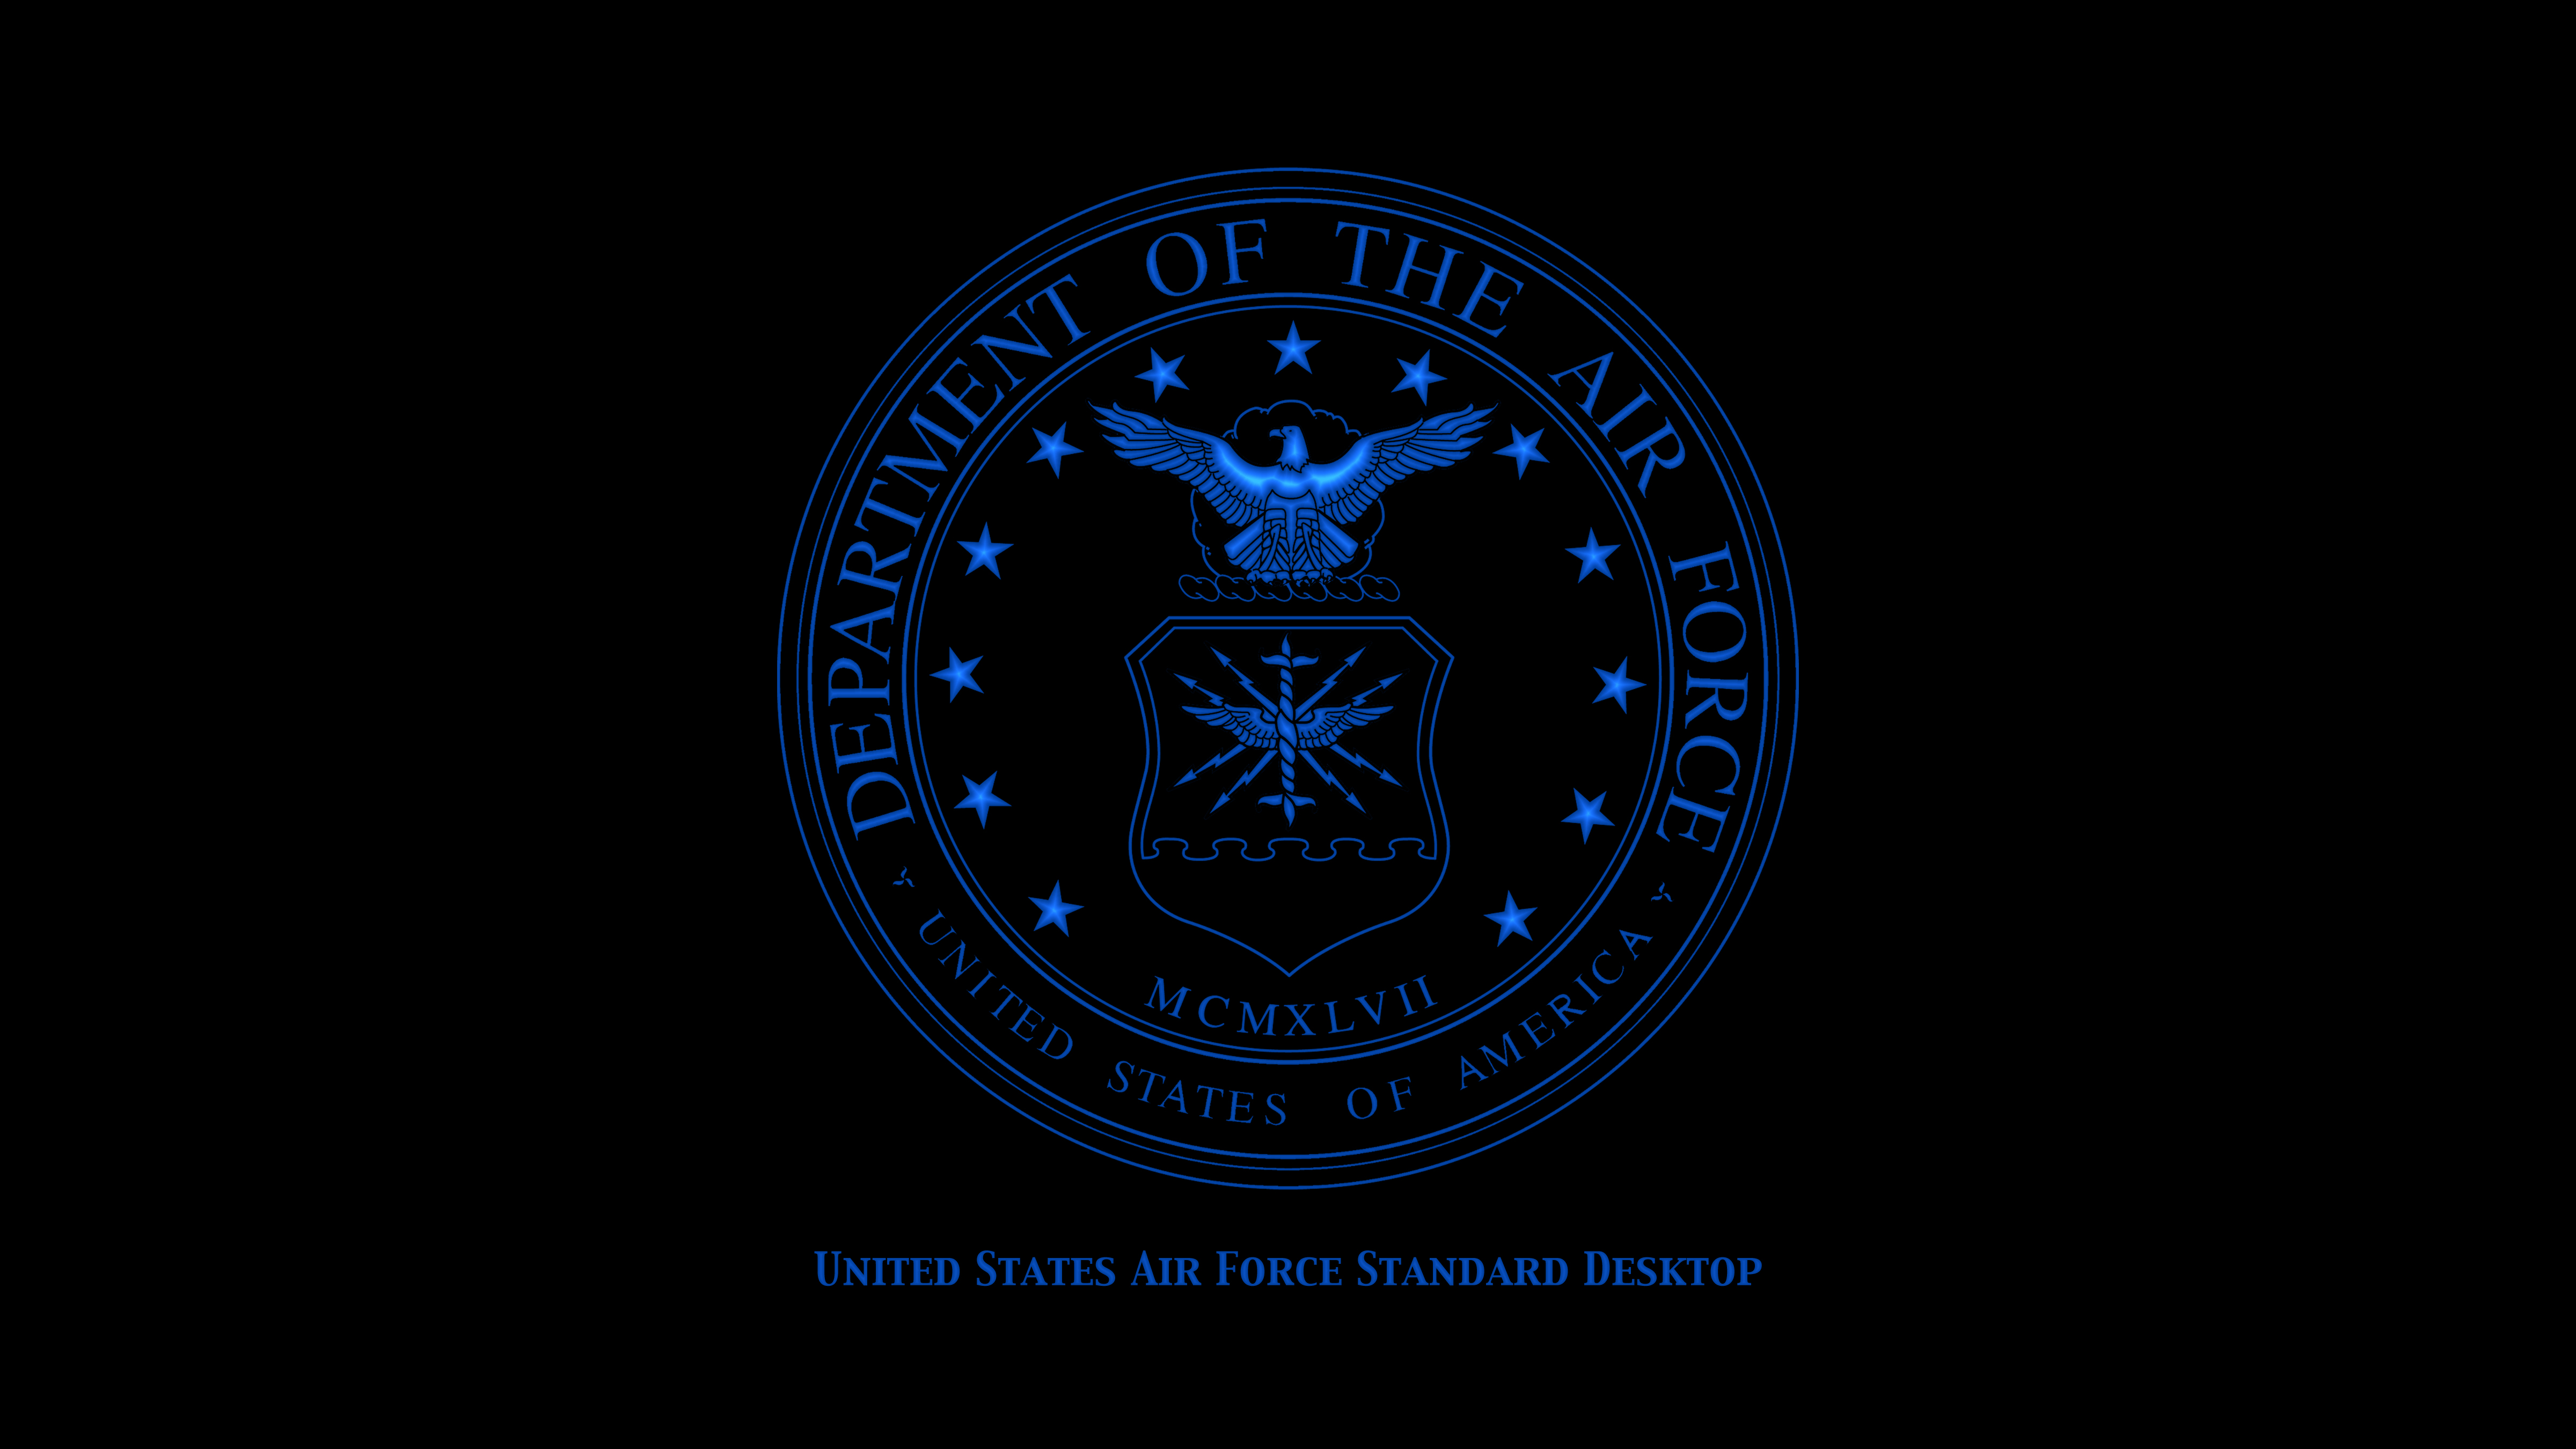 US Air Force Cyber Military Simple Background Black Background Reflection Logo  Wallpaper  Resolution4800x2700  ID1340050  wallhacom